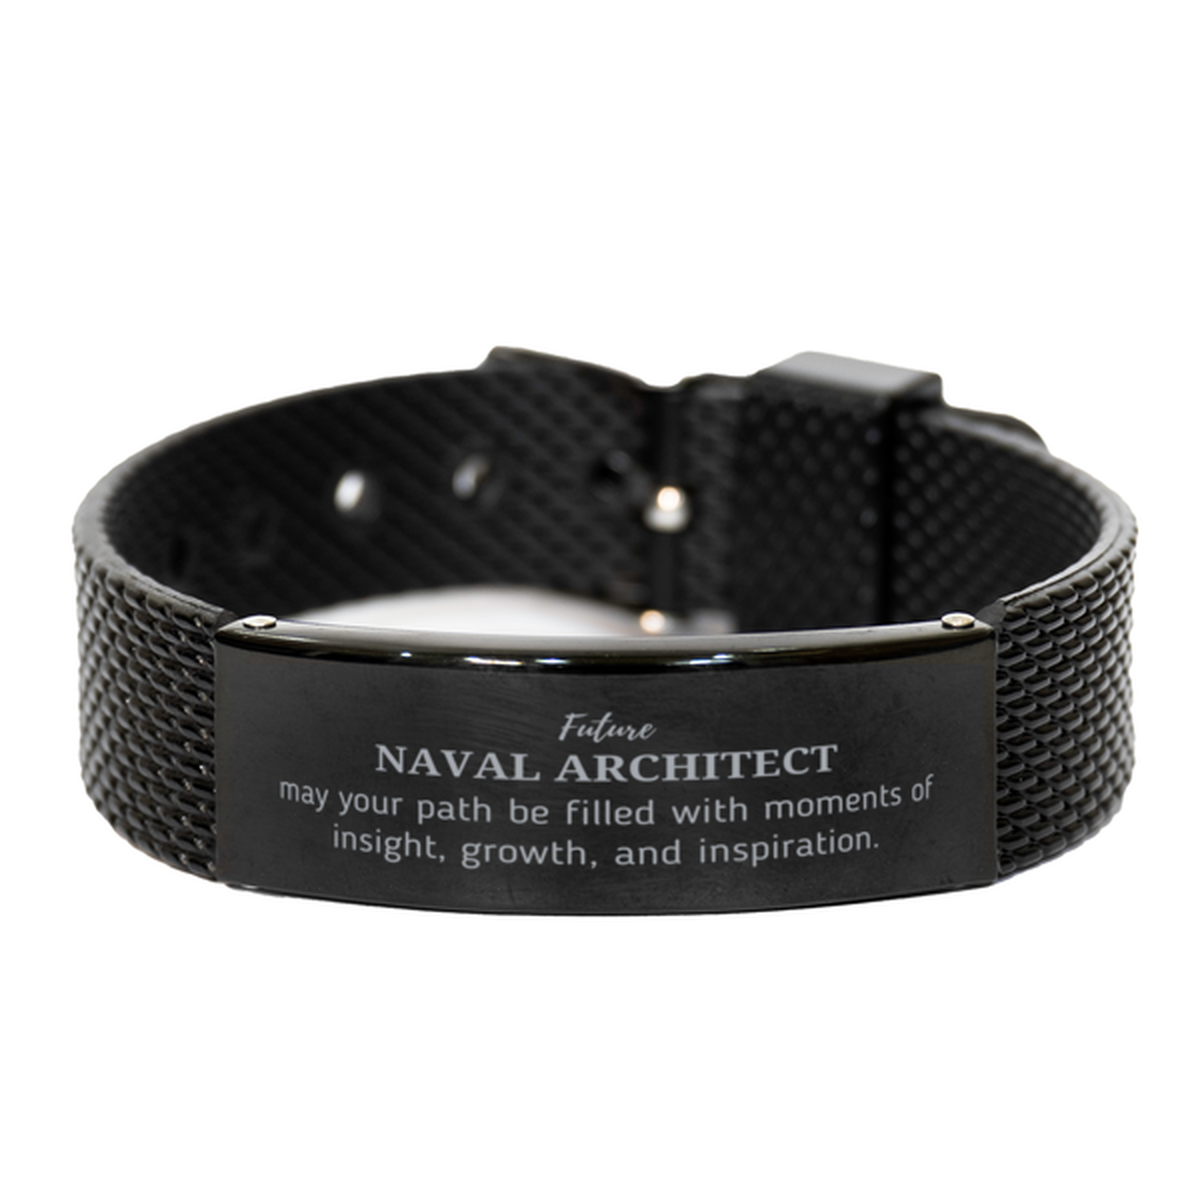 Future Naval Architect Gifts, May your path be filled with moments of insight, Graduation Gifts for New Naval Architect, Christmas Unique Black Shark Mesh Bracelet For Men, Women, Friends